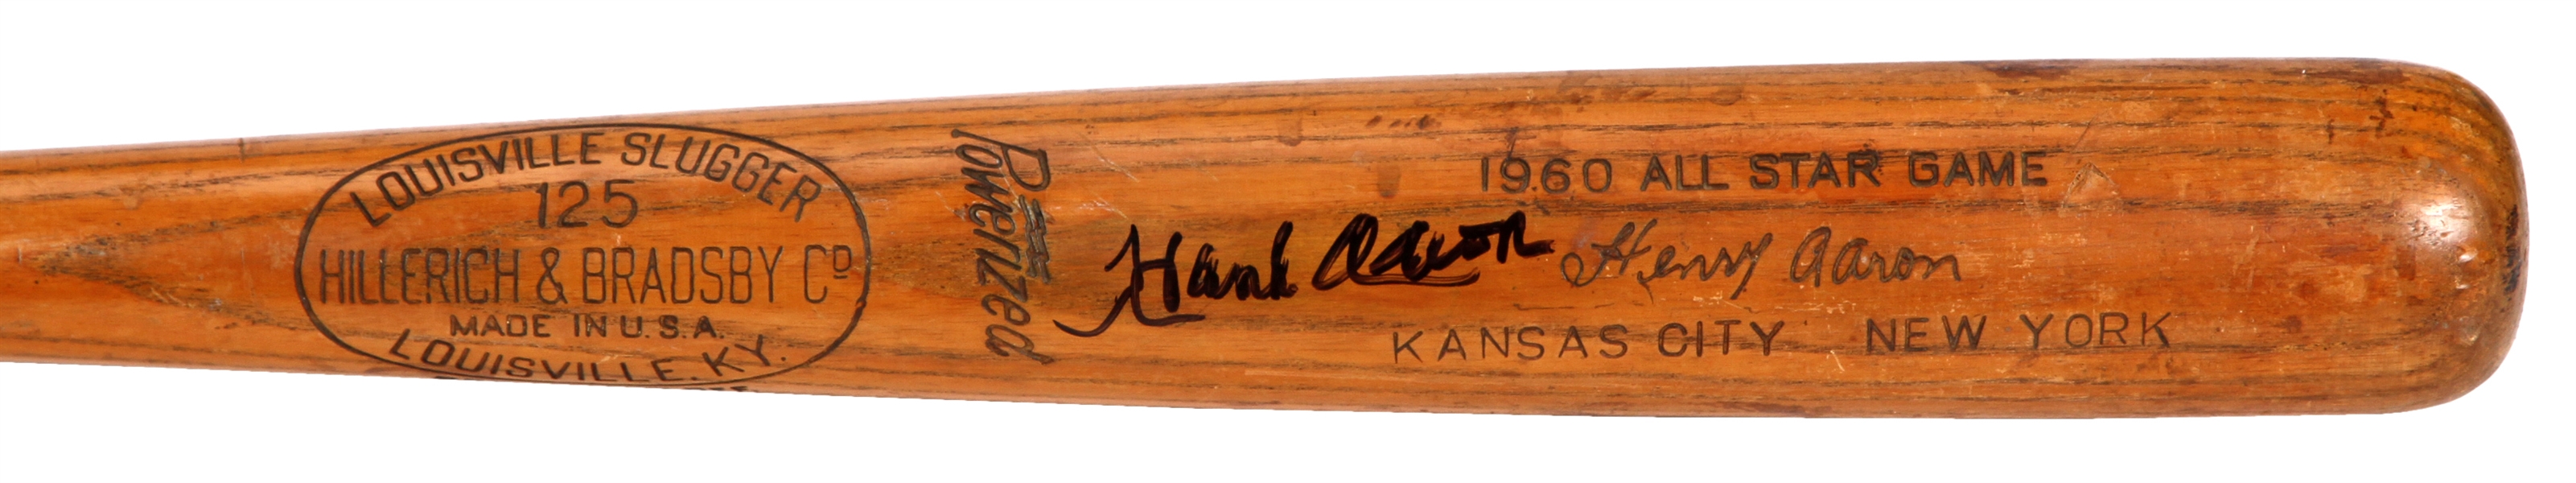 1960 Hank Aaron Game Used and Signed Hillerich and Bradsby All Star Game Bat (PSA/DNA GU 8)